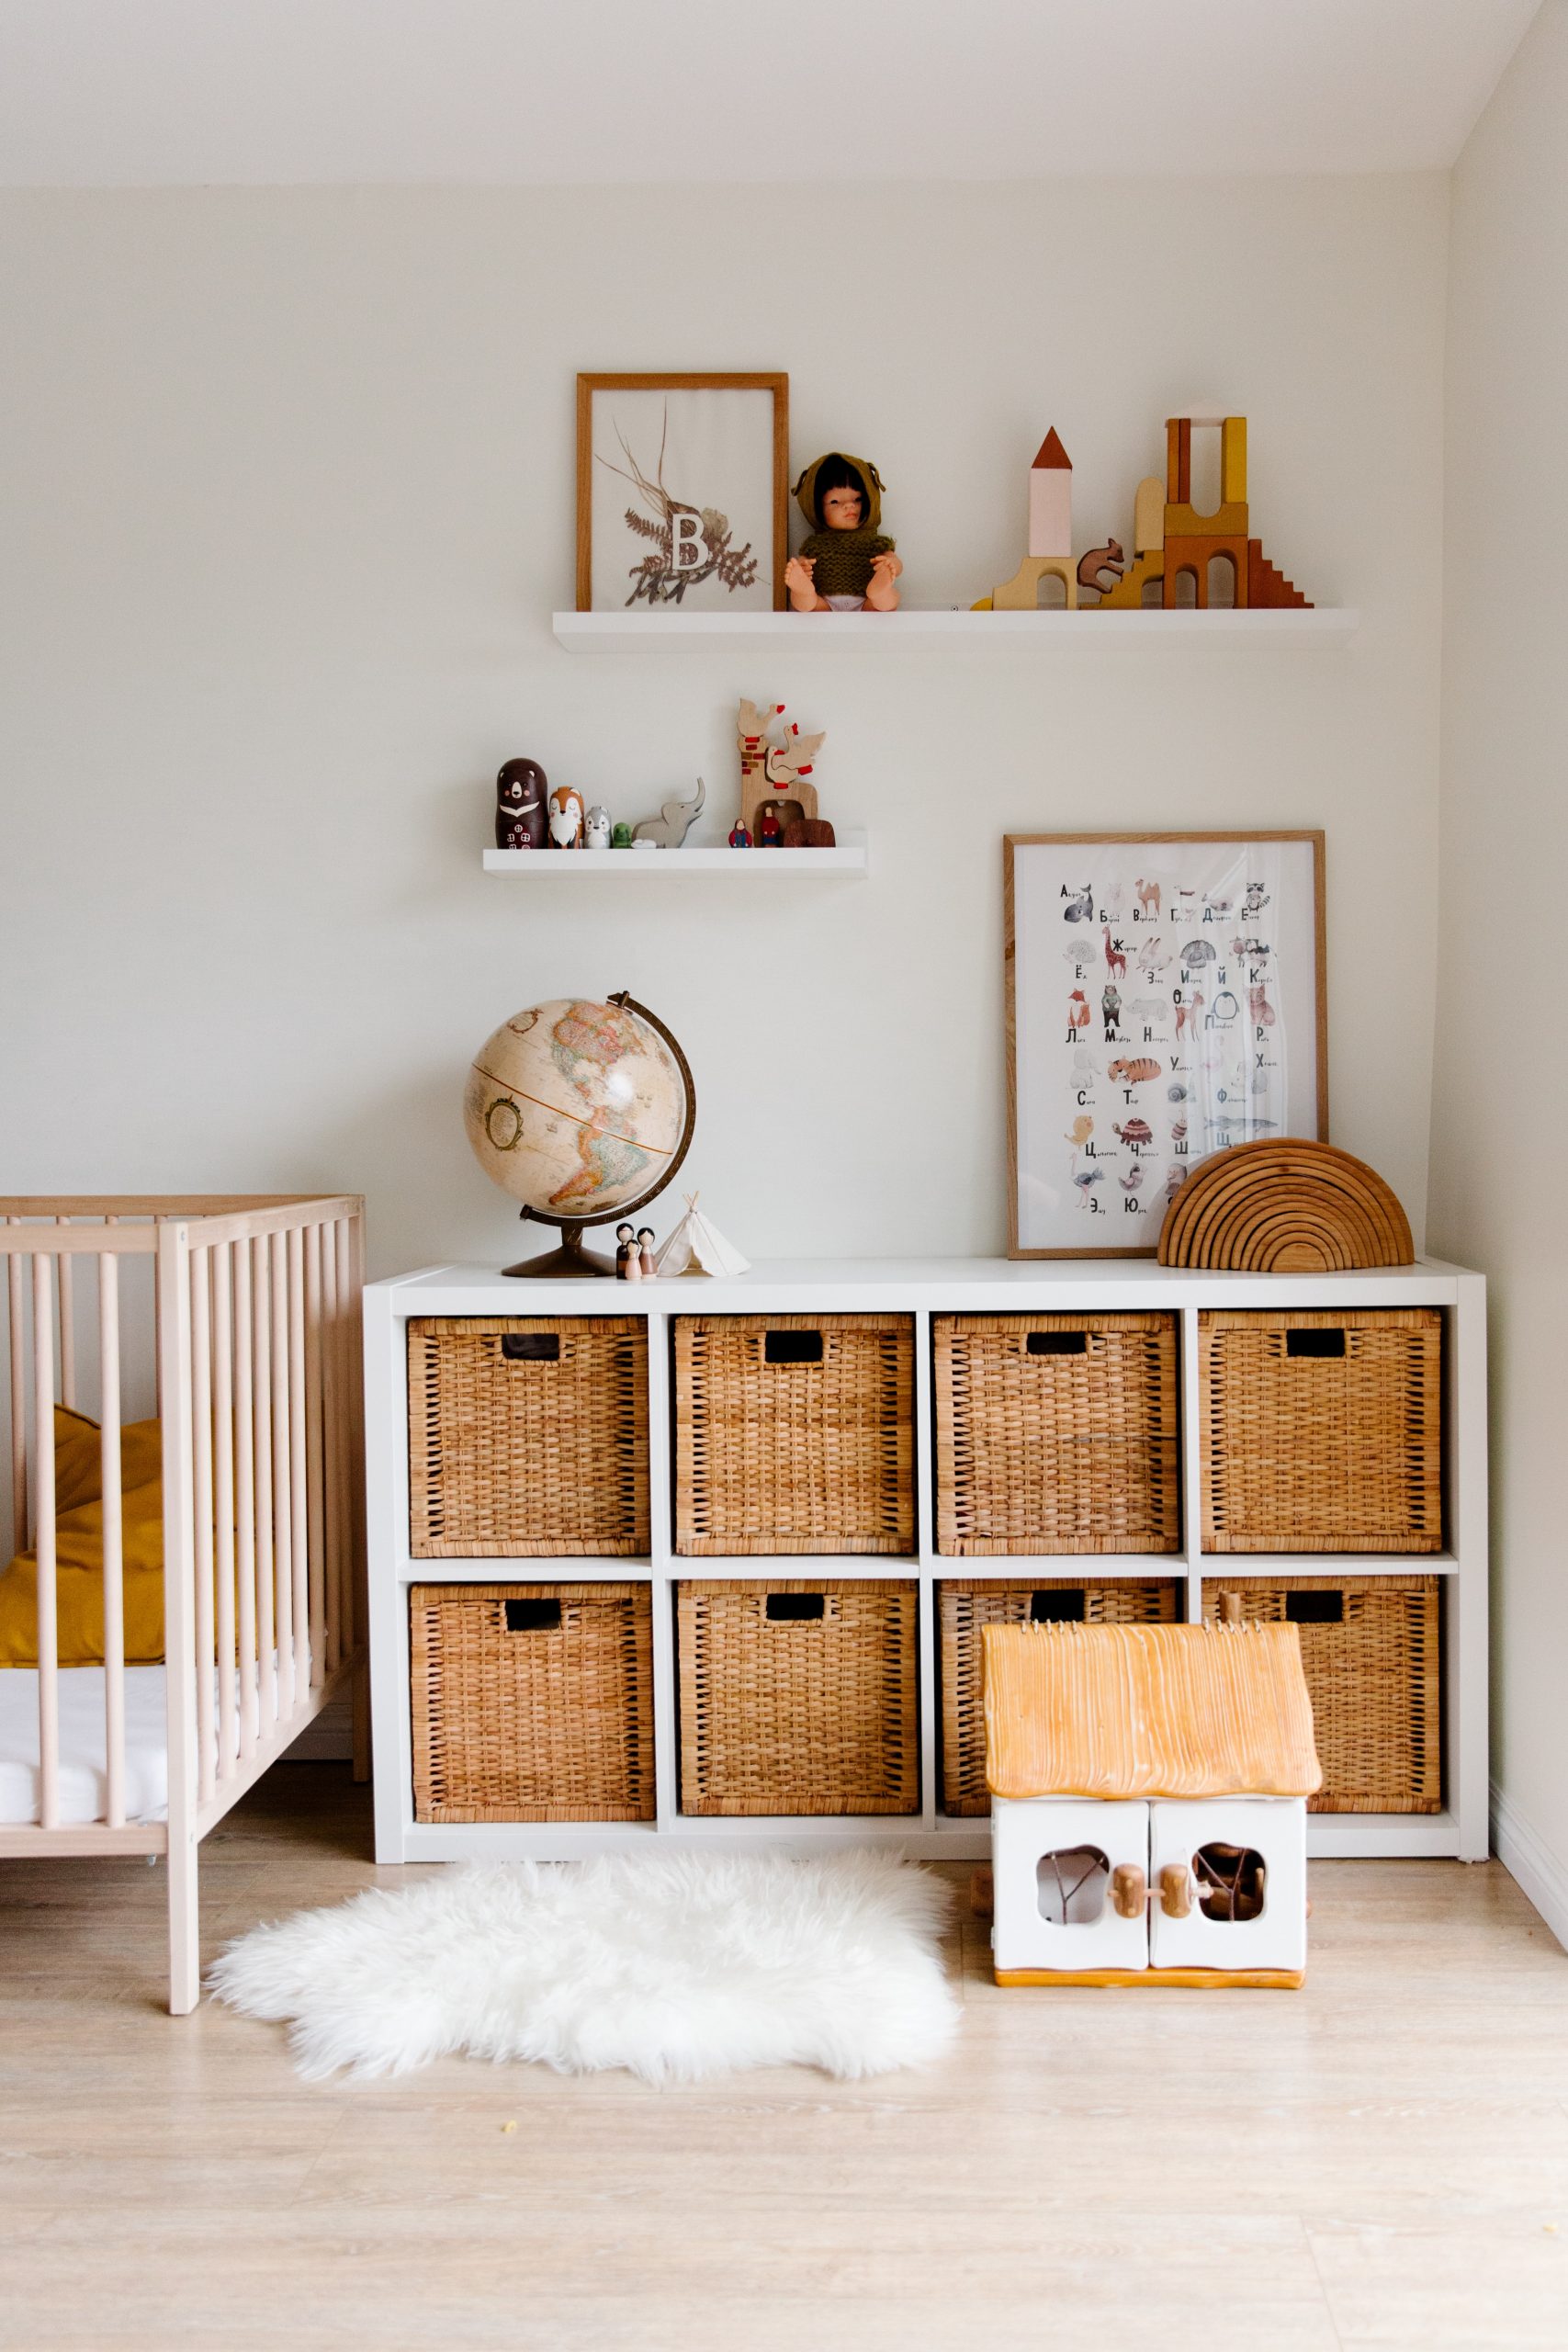 Cubby with storage baskets